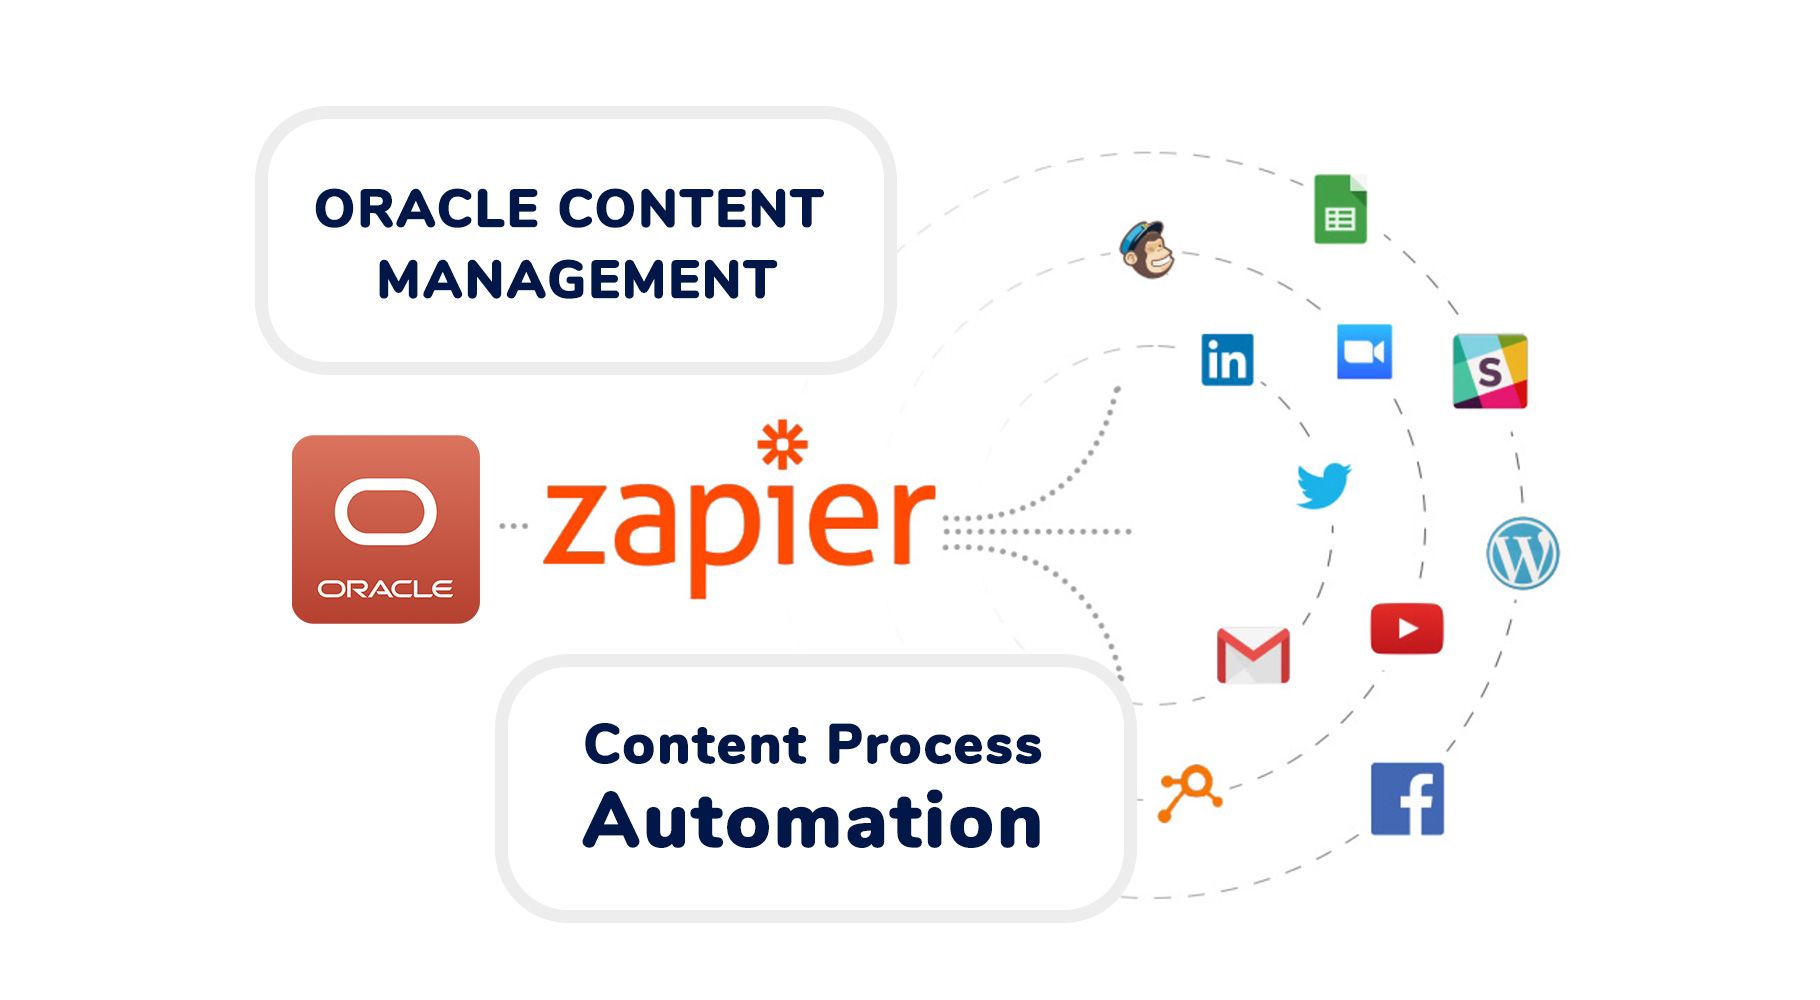 How To: Oracle Content Management Automating Social Posts -(Twitter, Linkedn etc)